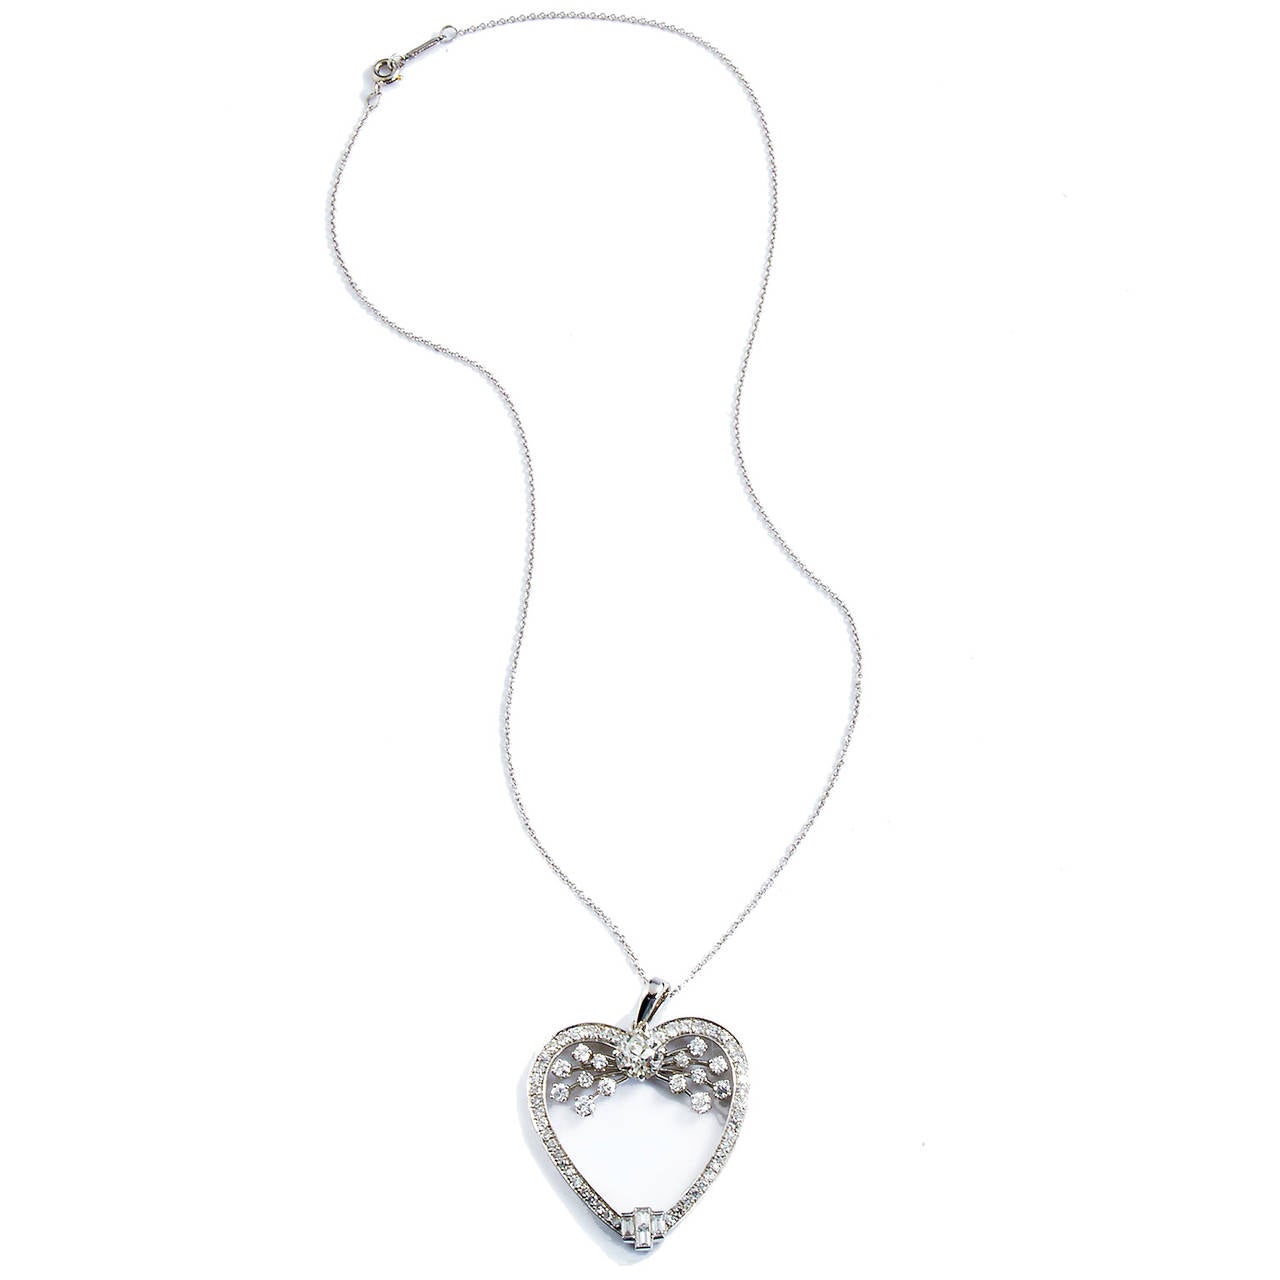 This sophisticated and feminine heart pendant is rendered in platinum with 64 brilliant, white, round diamonds weighing approximately 2.75 carats emanating pure radiance from it's frame. Evoking the movement of water, the 1.33 carat old European